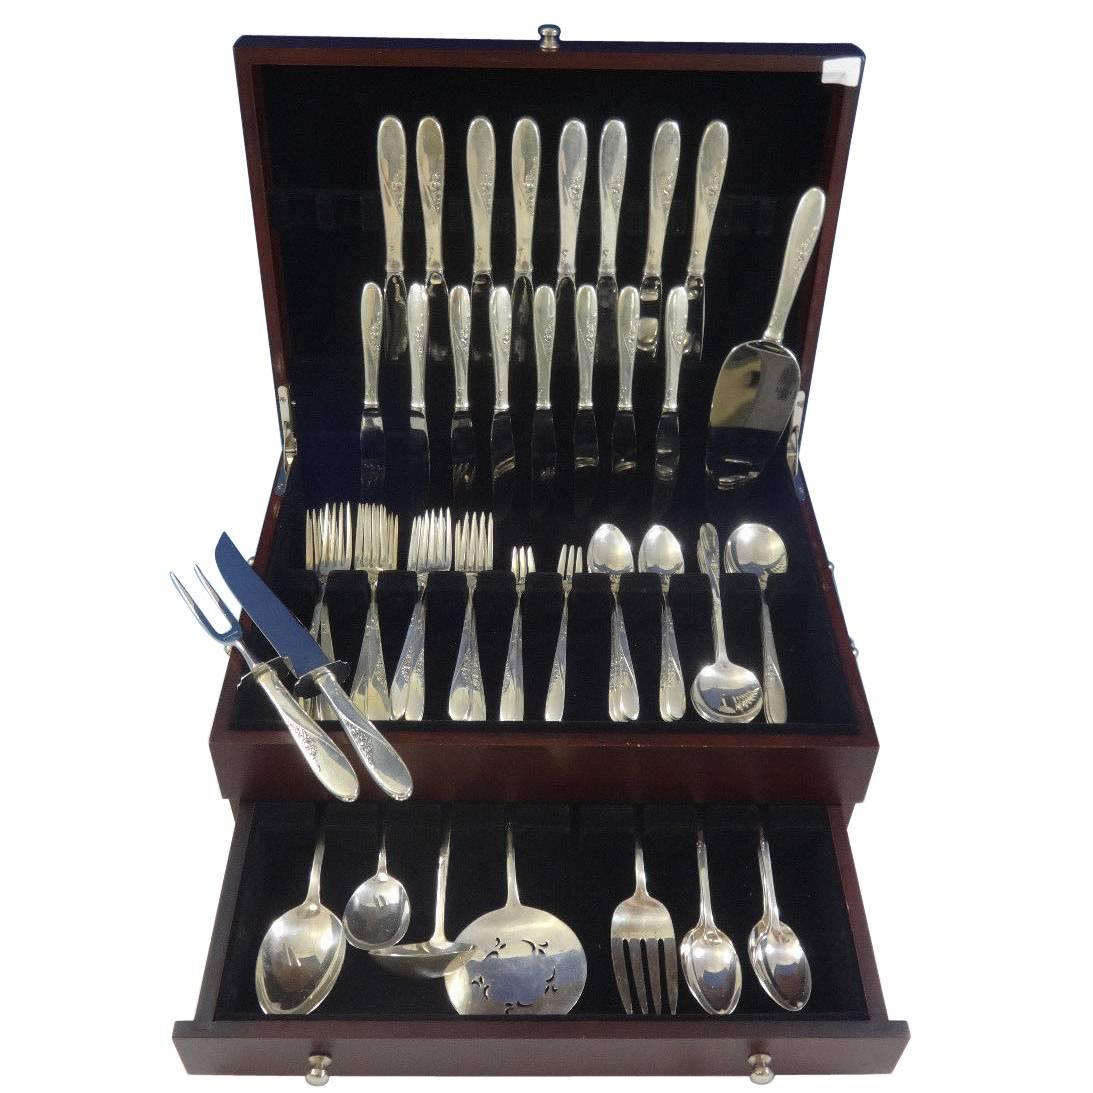 Rose spray by Easterling sterling silver flatware set of 72 pieces. This set includes:

Eight knives, 8 7/8